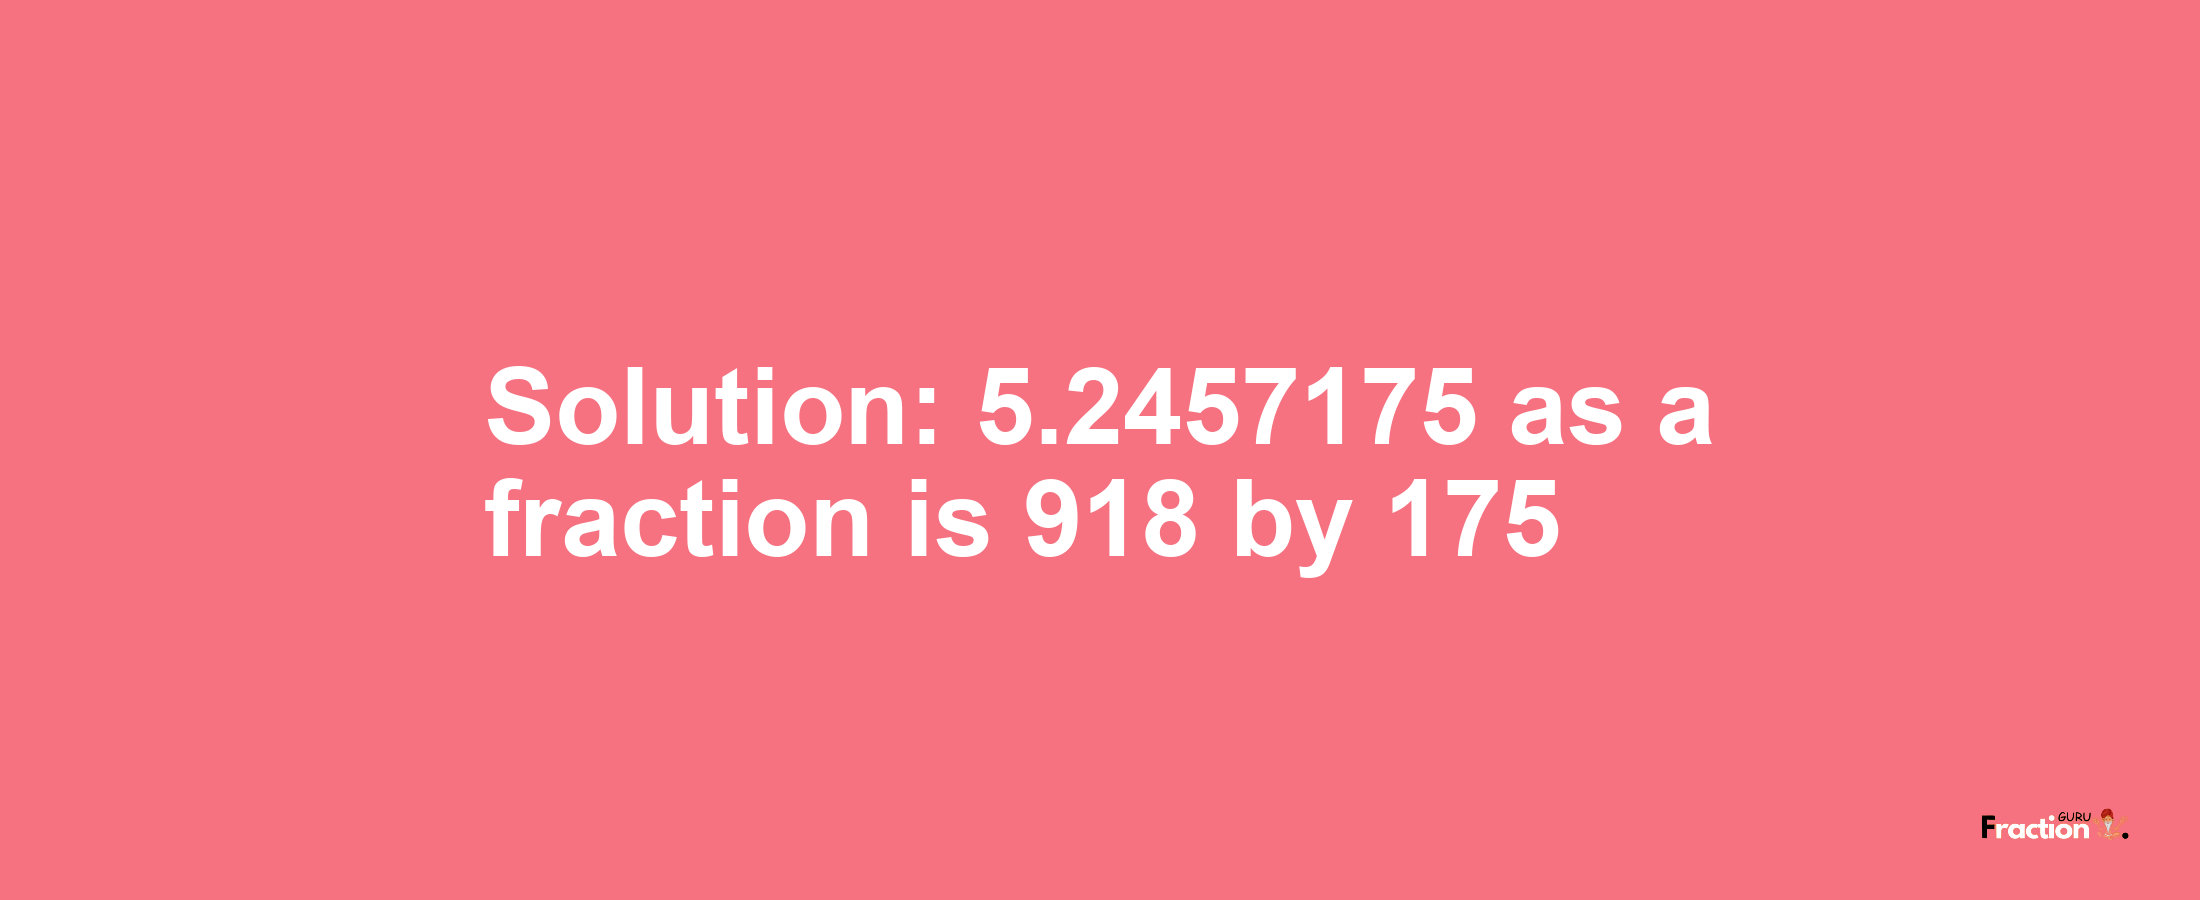 Solution:5.2457175 as a fraction is 918/175